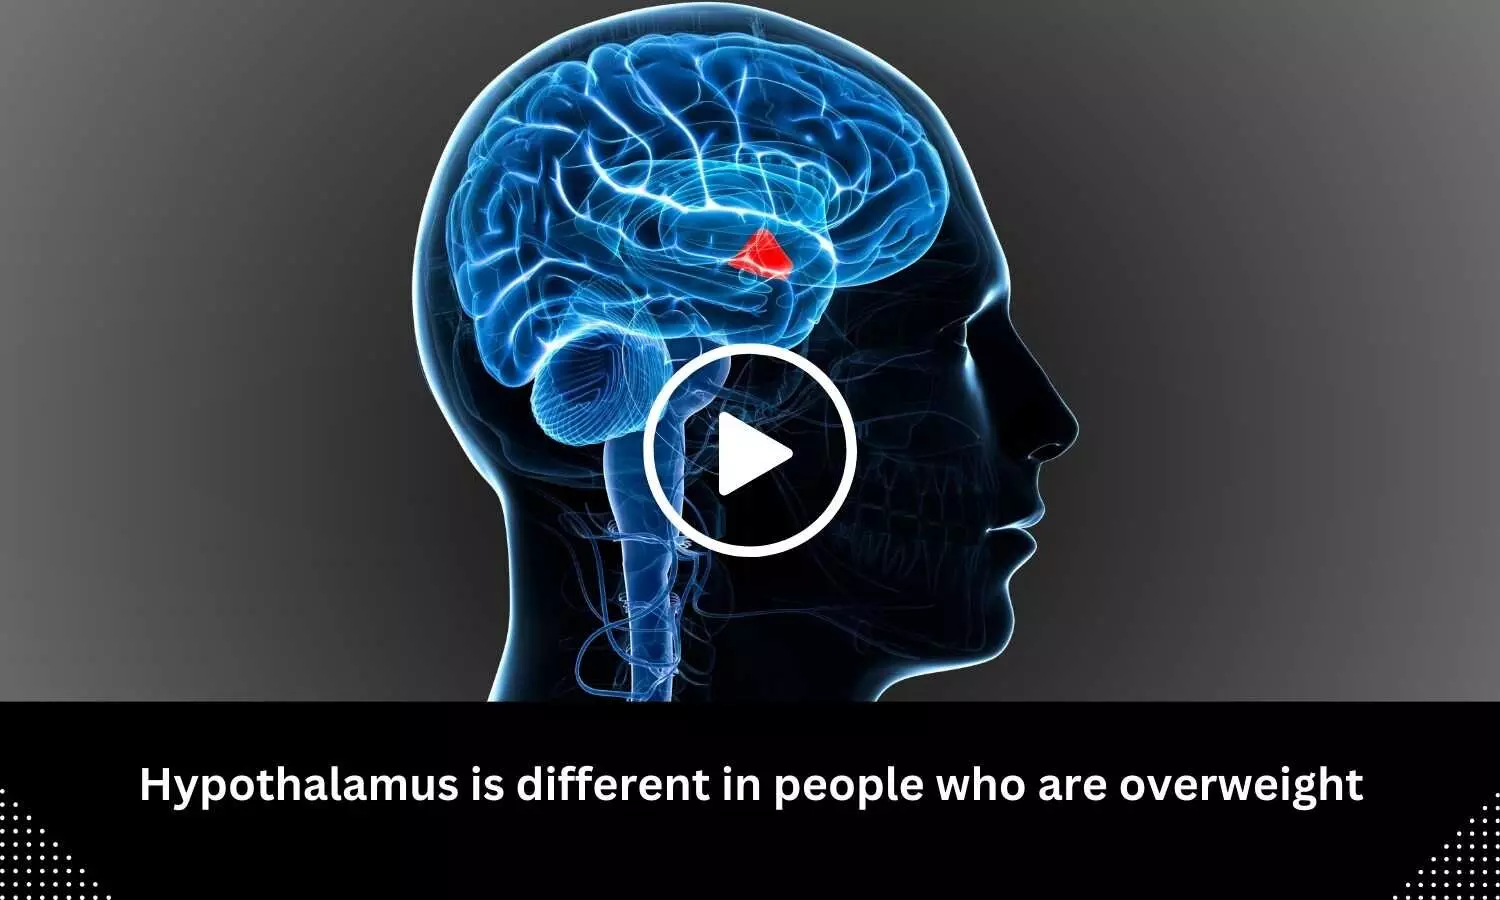 Hypothalamus is different in people who are overweight